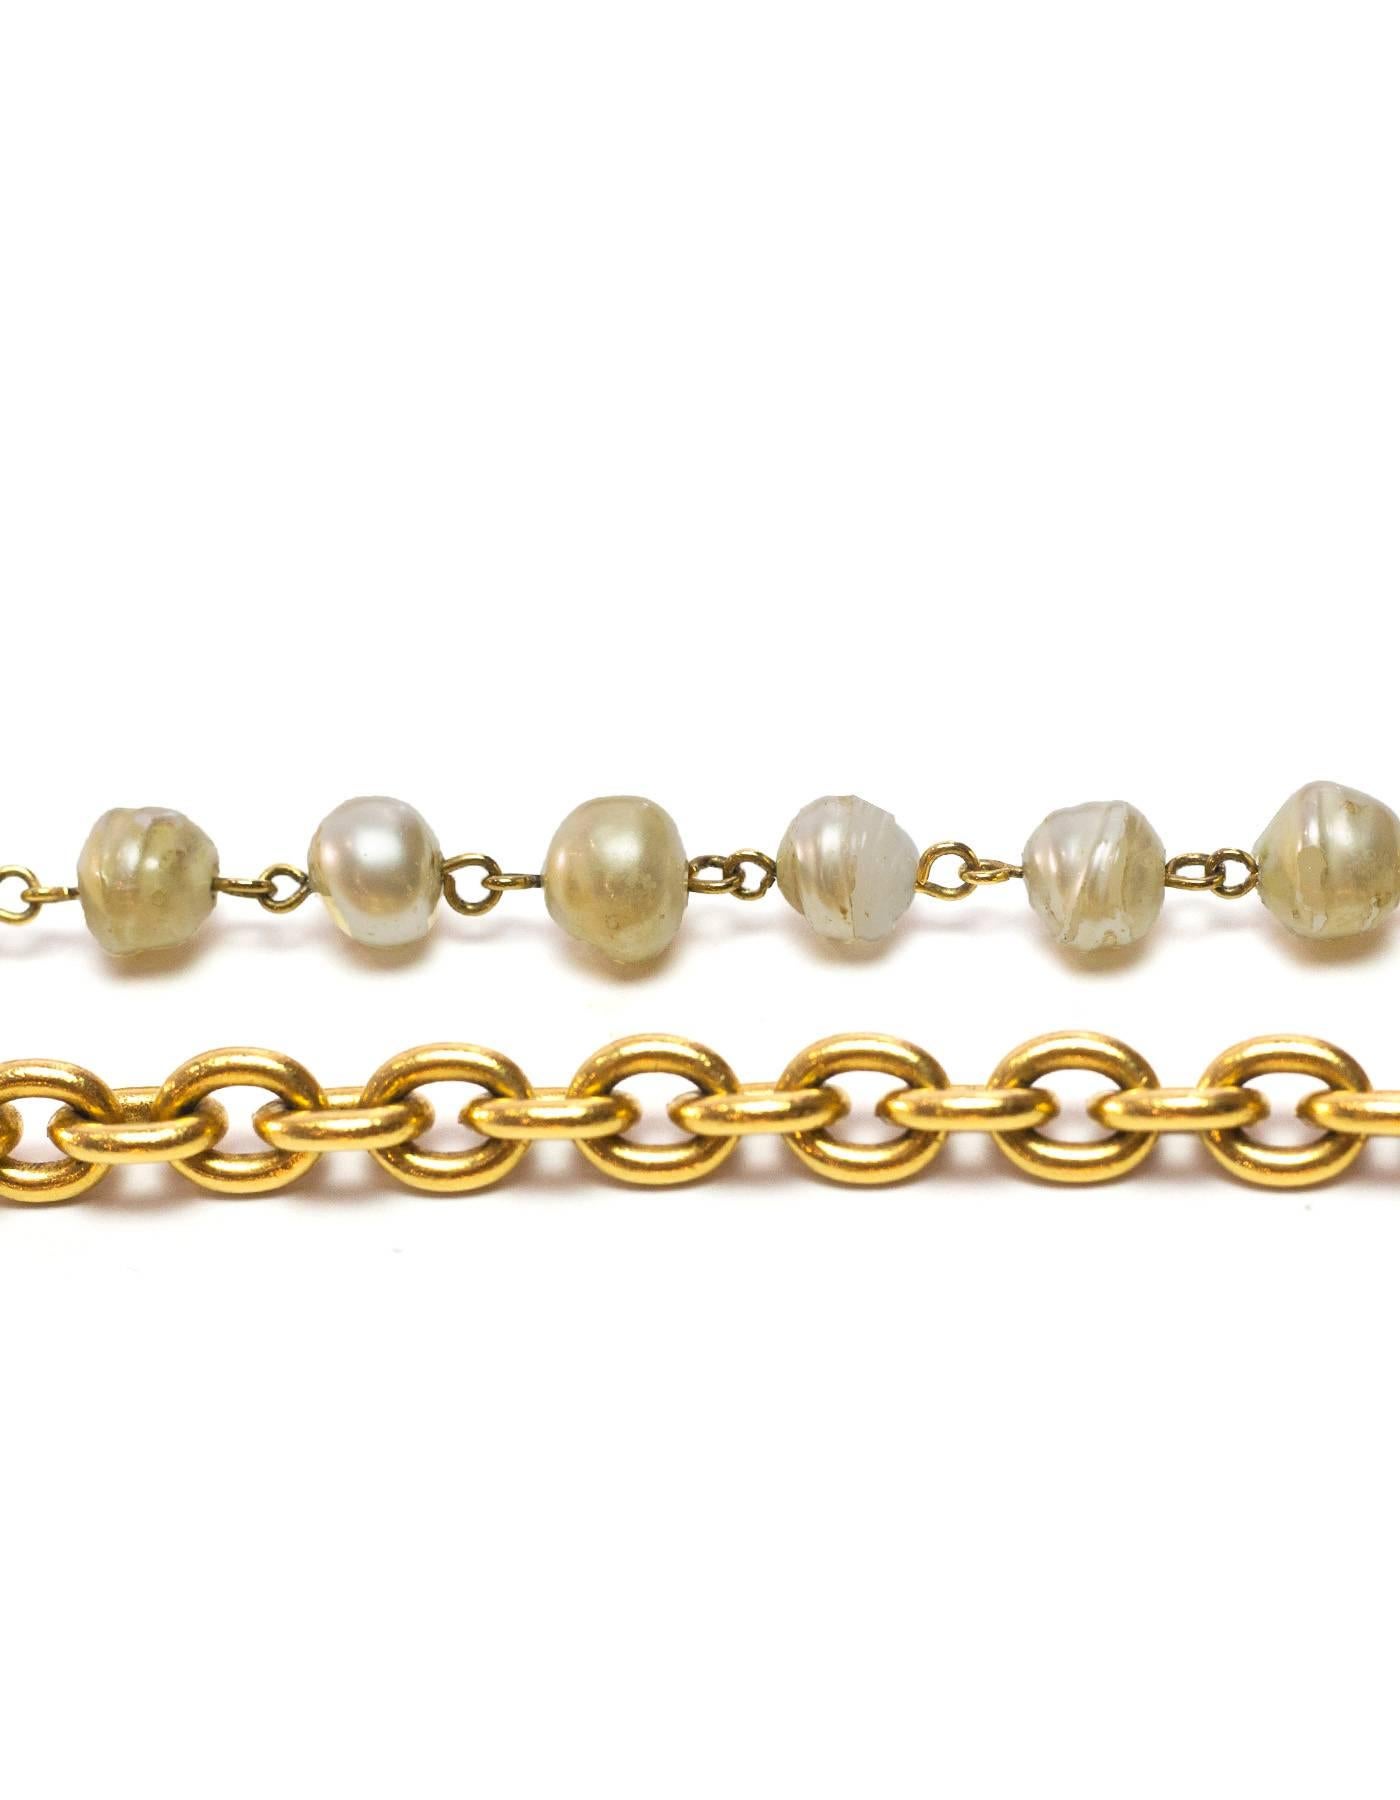 Chanel '90s Vintage Ivory Faux Pearl & Goldtone Extra Long Necklace 1